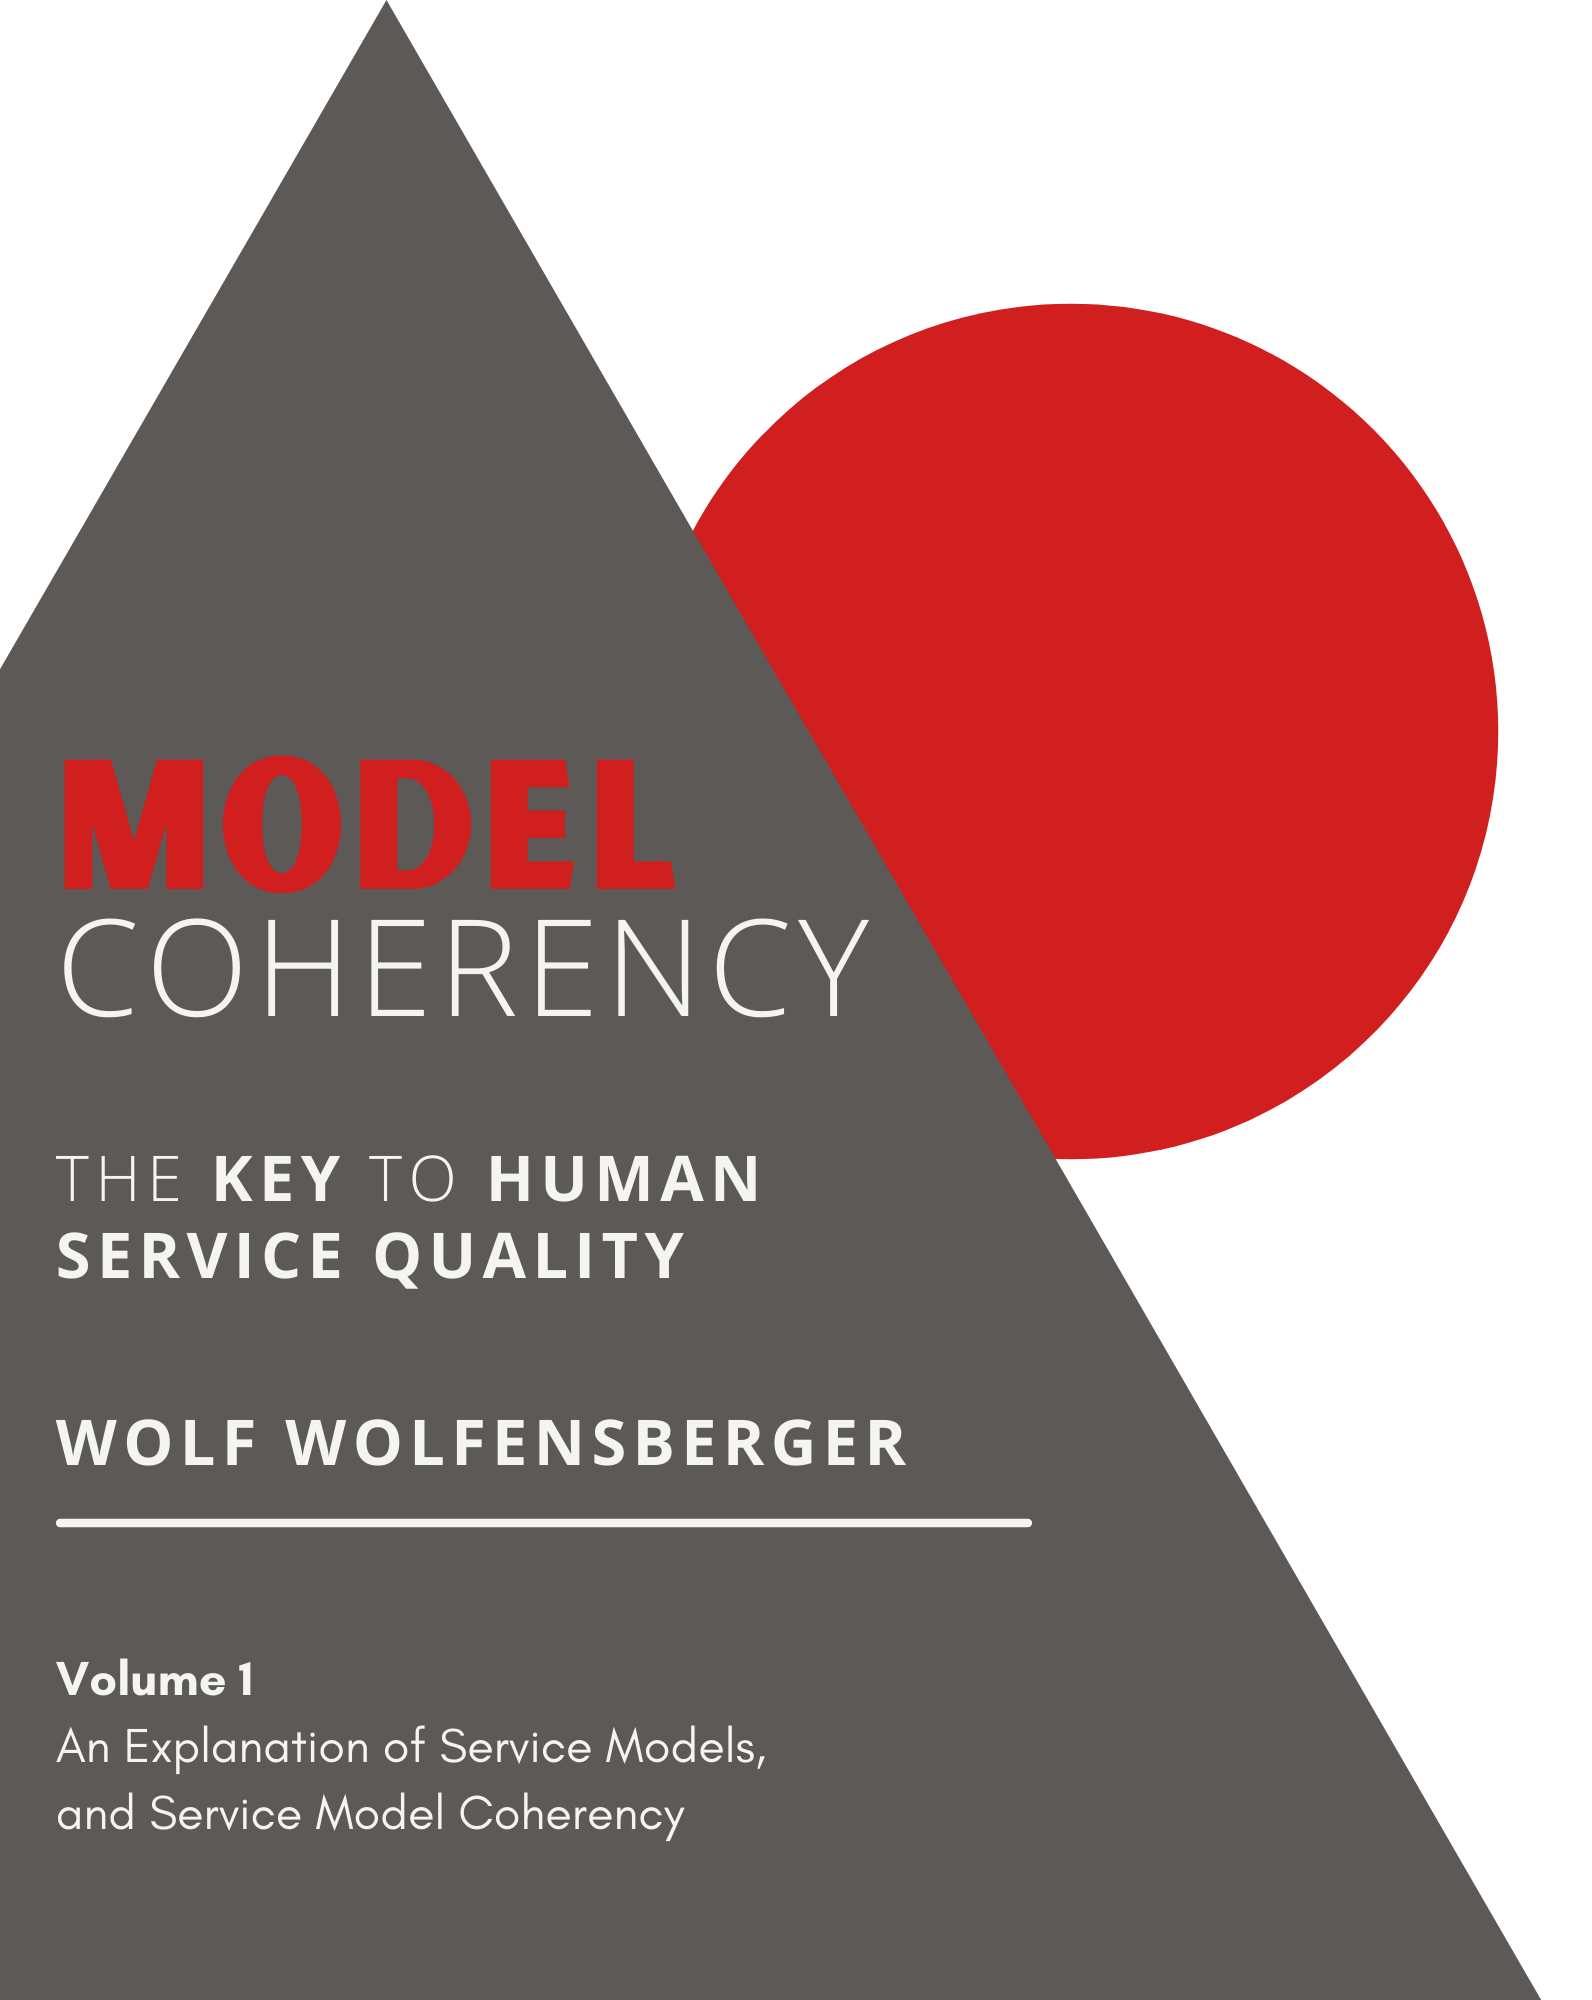 MODEL COHERENCY The Key to Human Service Quality Volume 1 – An Explanation of Service Models, and Service Model Coherency